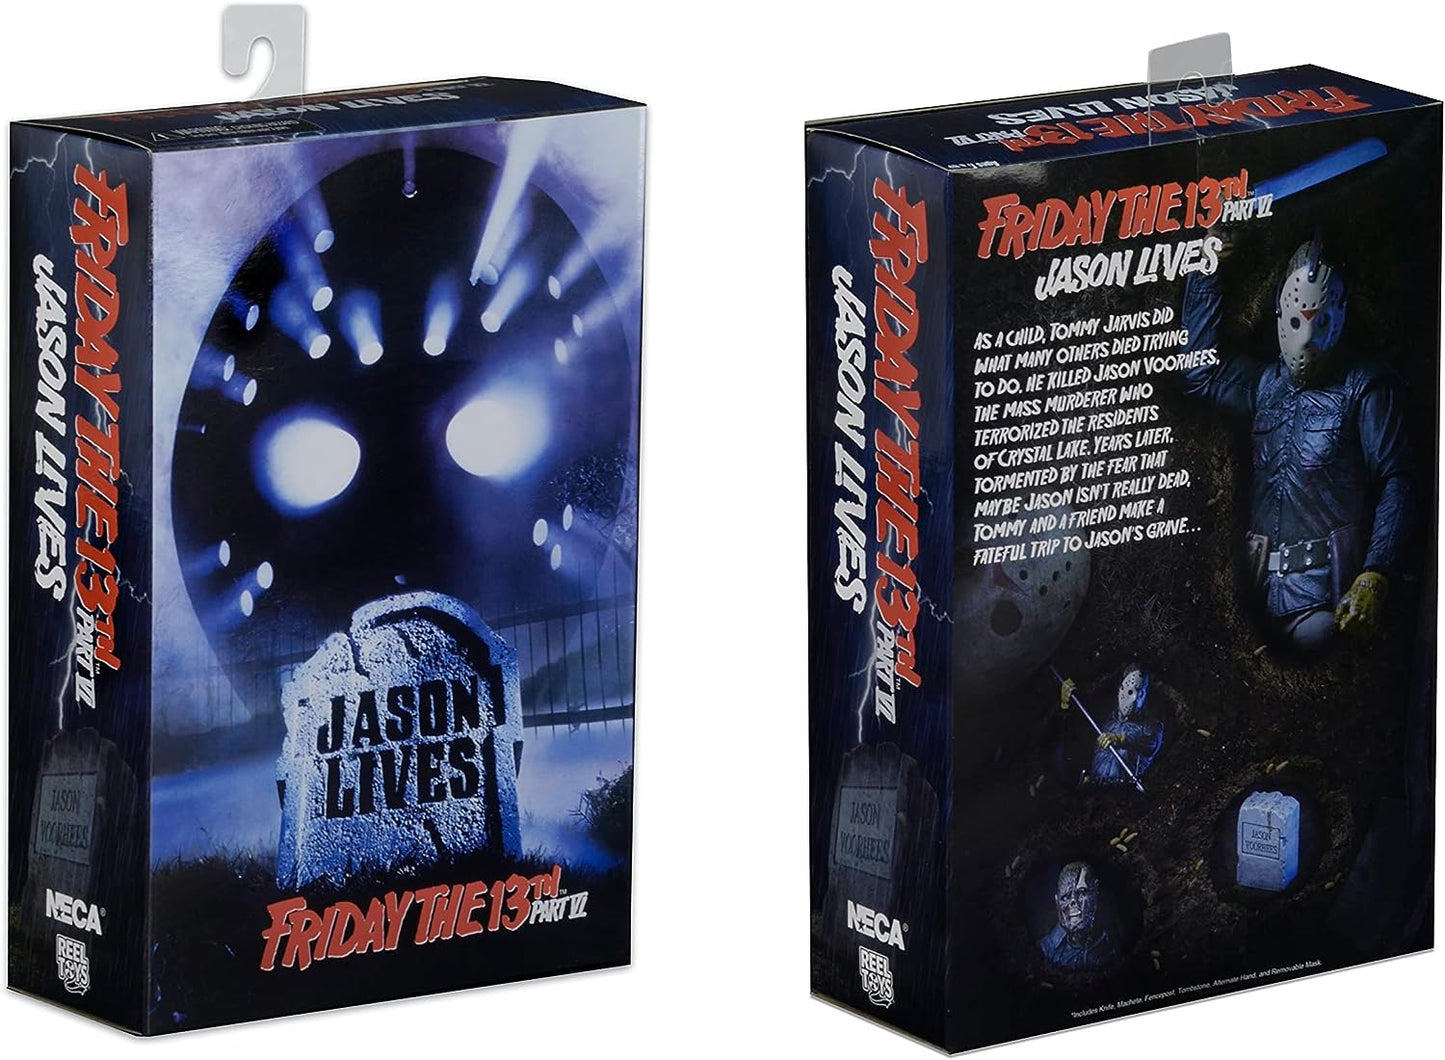 FRIDAY THE 13TH - Jason Part 6 Neca Ultimate Figure